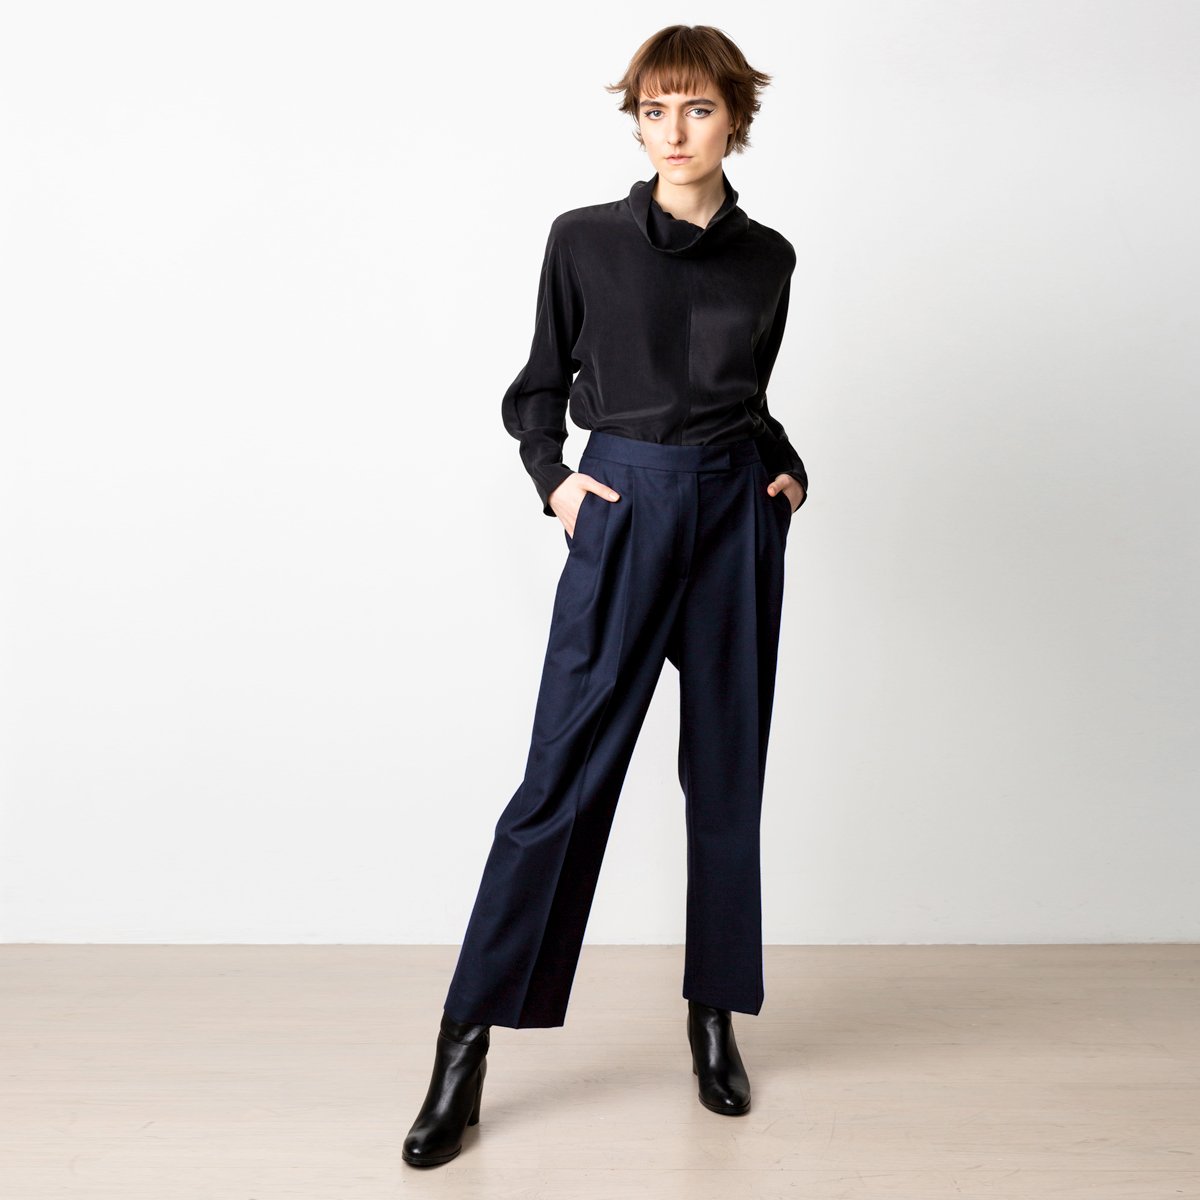 Cropped Trousers - Buy Cropped Trousers Online Starting at Just